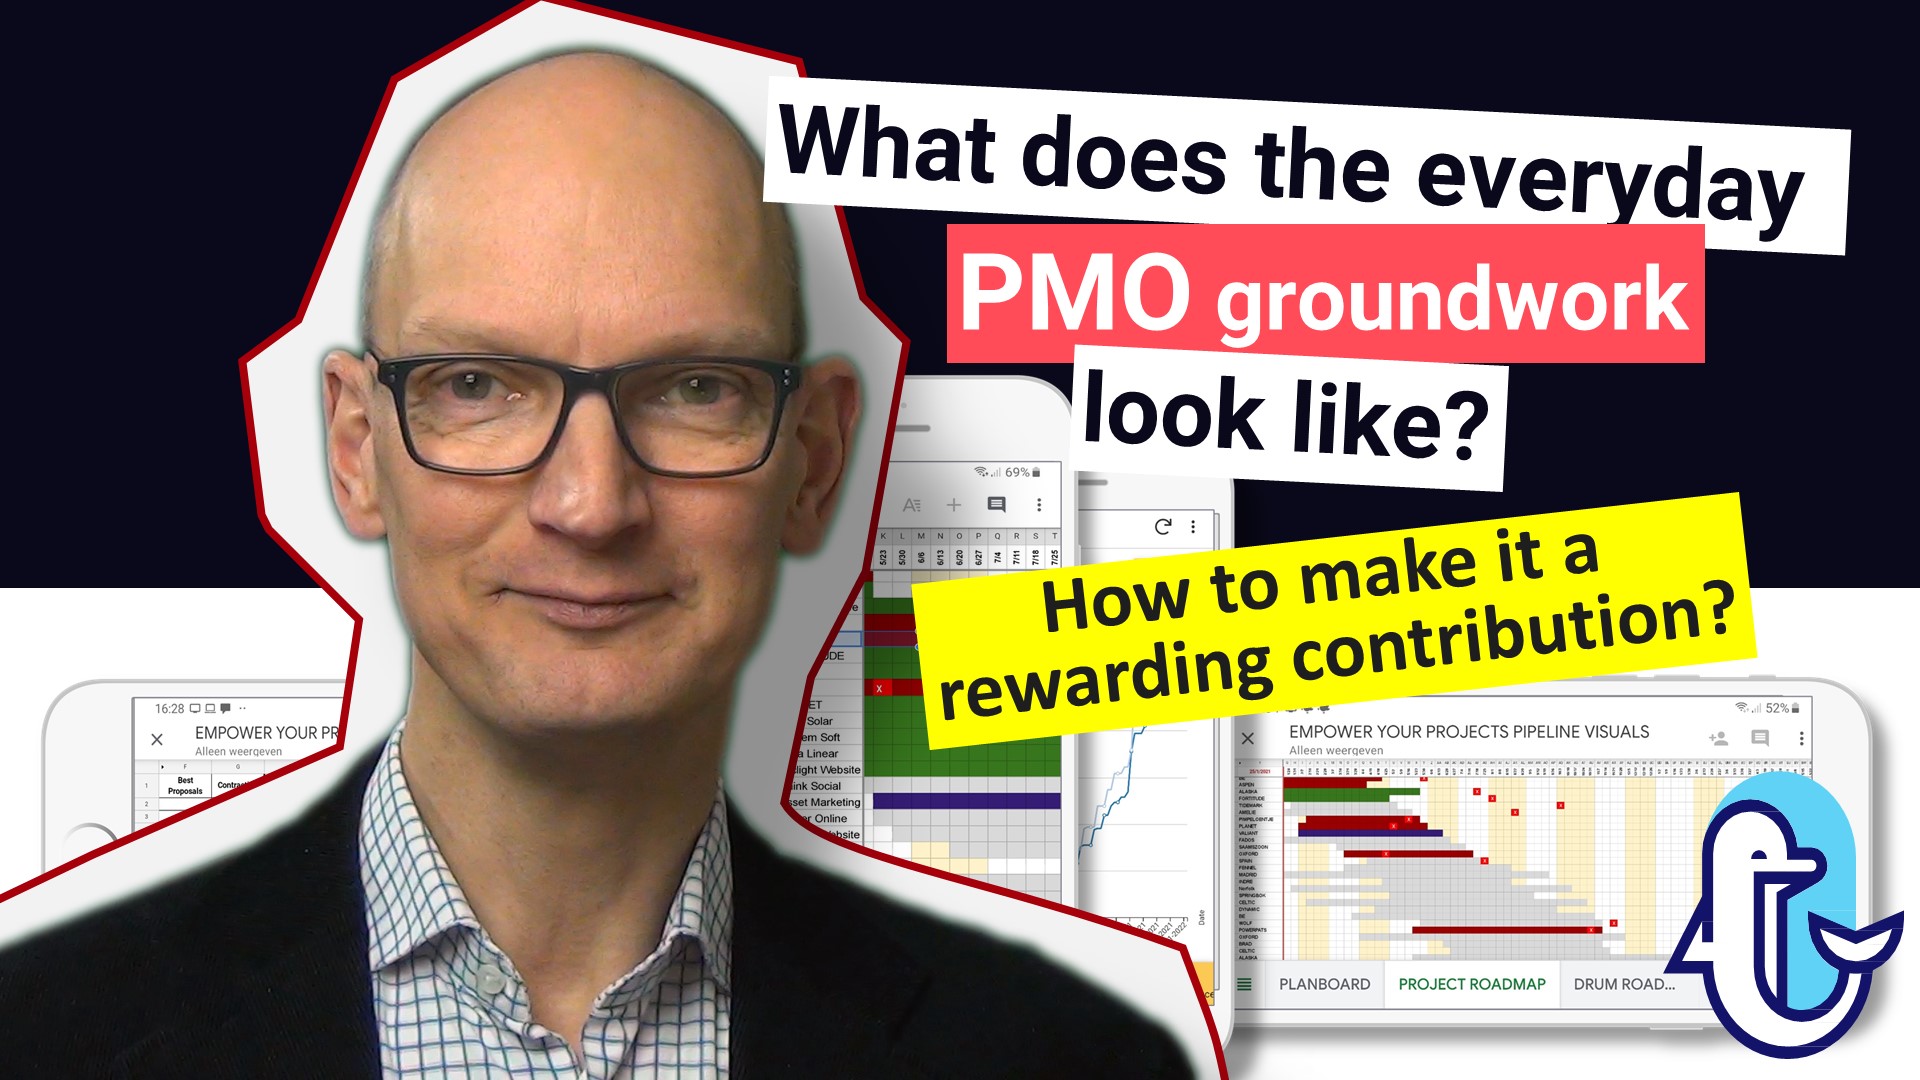 What does the everyday PMO groundwork look like?